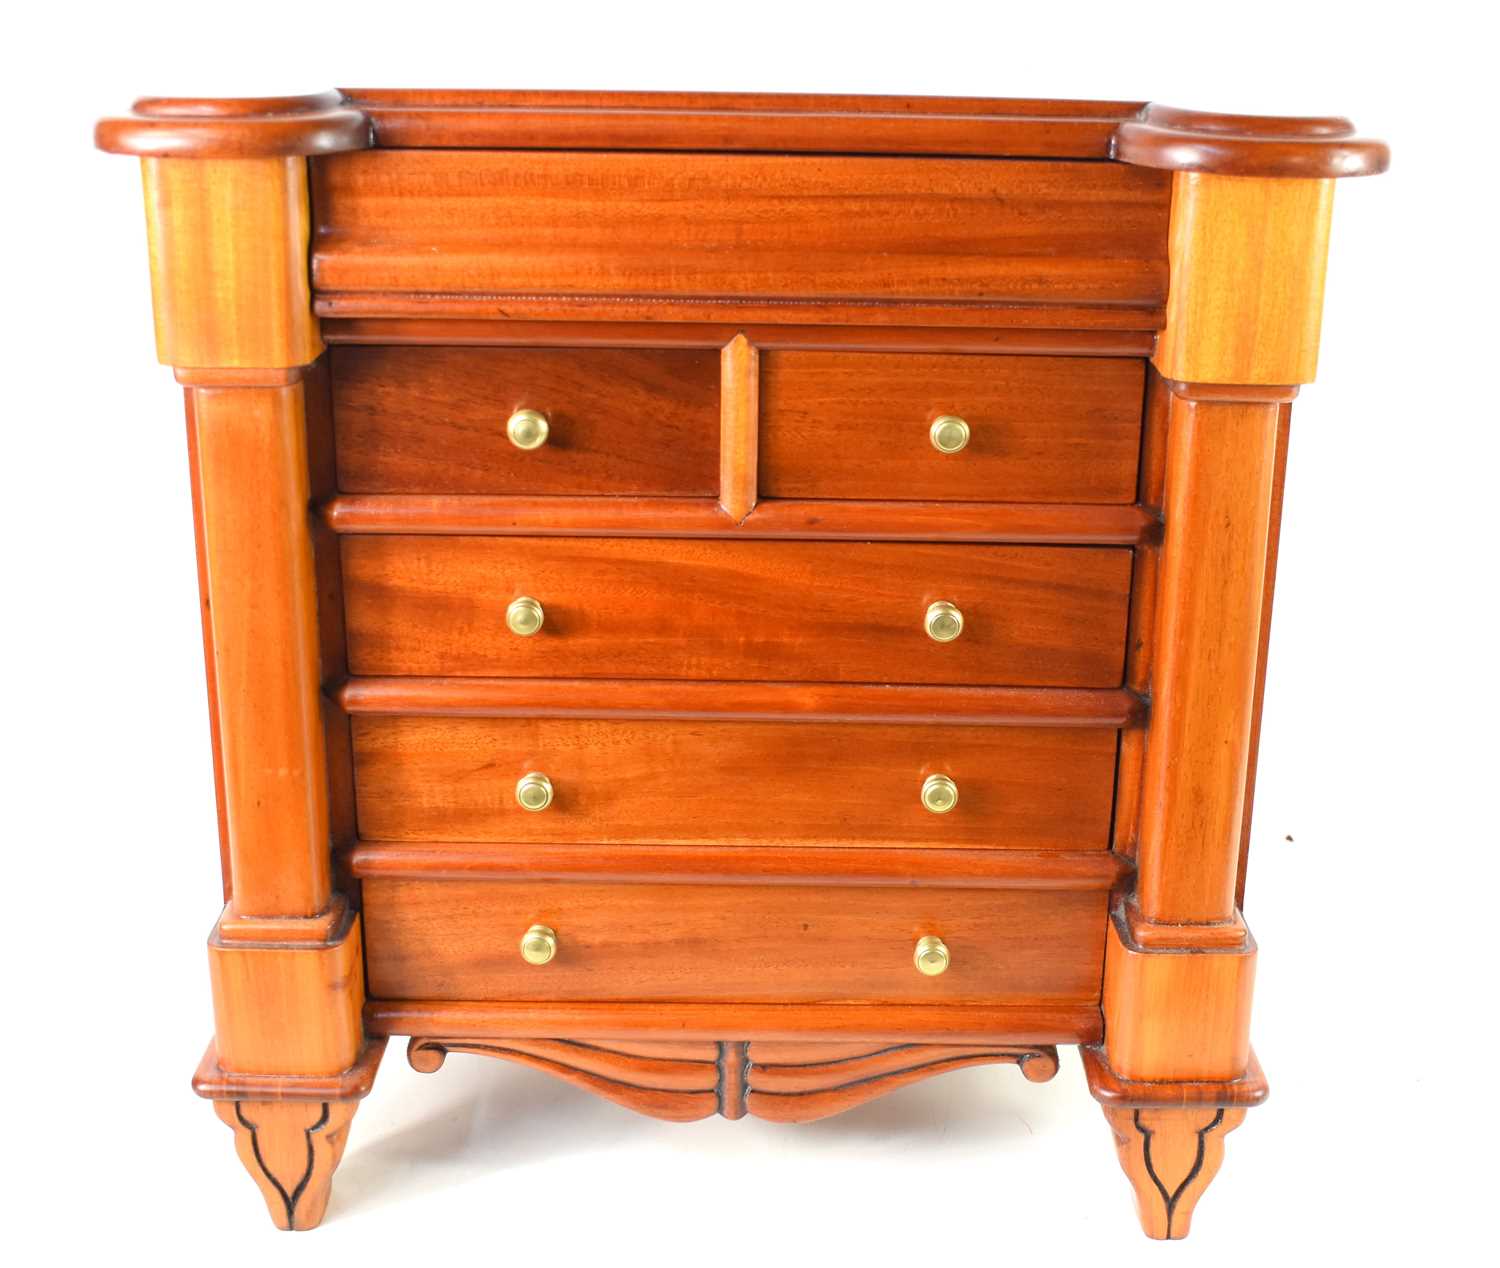 A late Victorian apprentice piece Scottish chest of drawers in solid mahogany, the single ogee